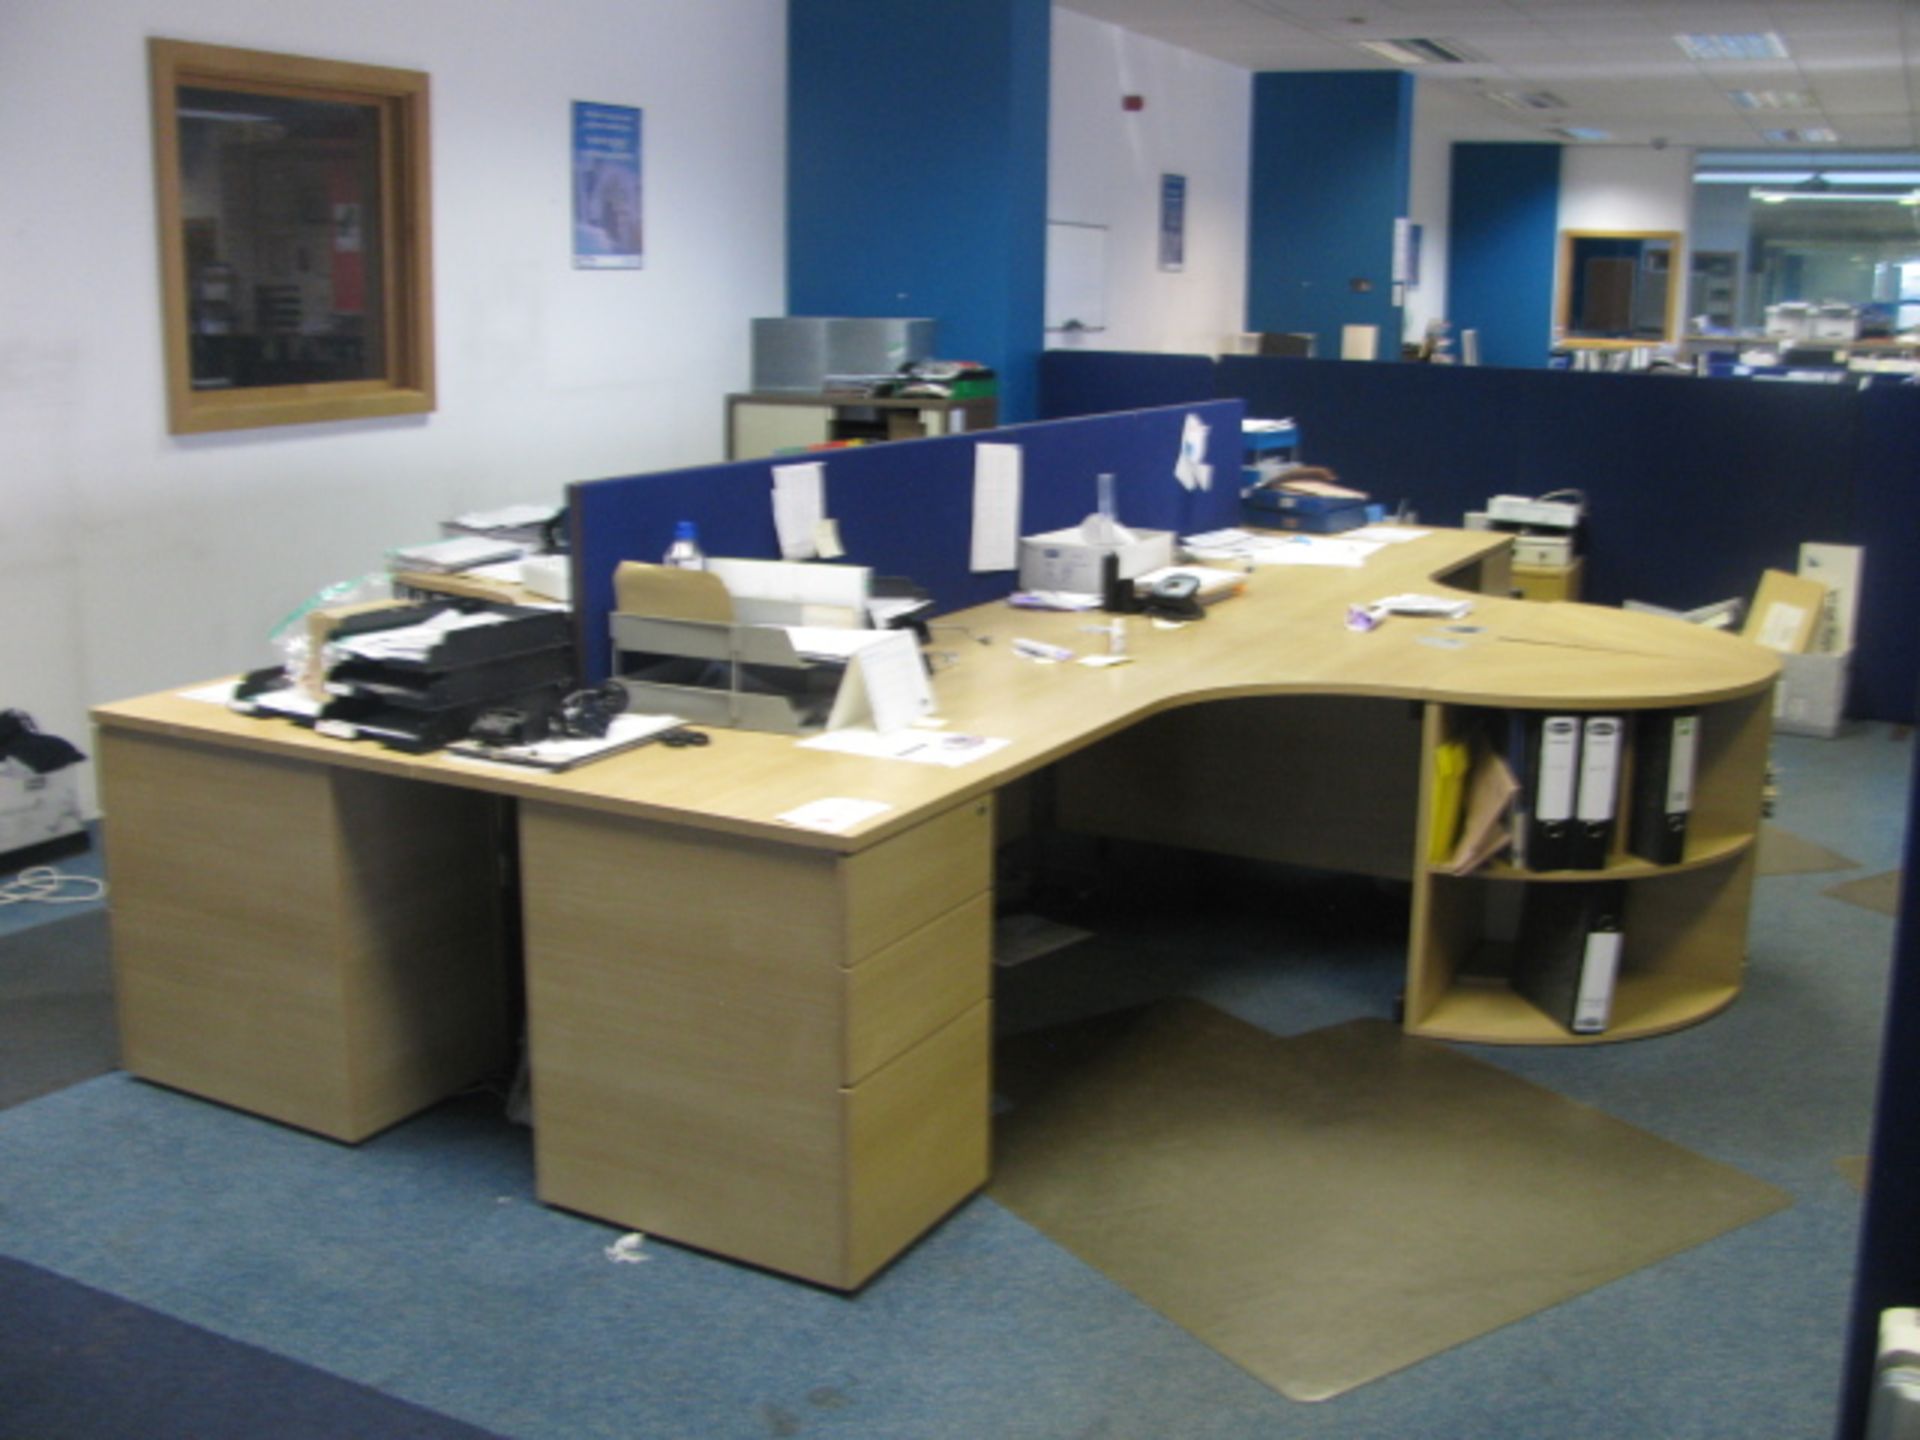 4 x light oak veneer workstations with pedestals and acoustic screens